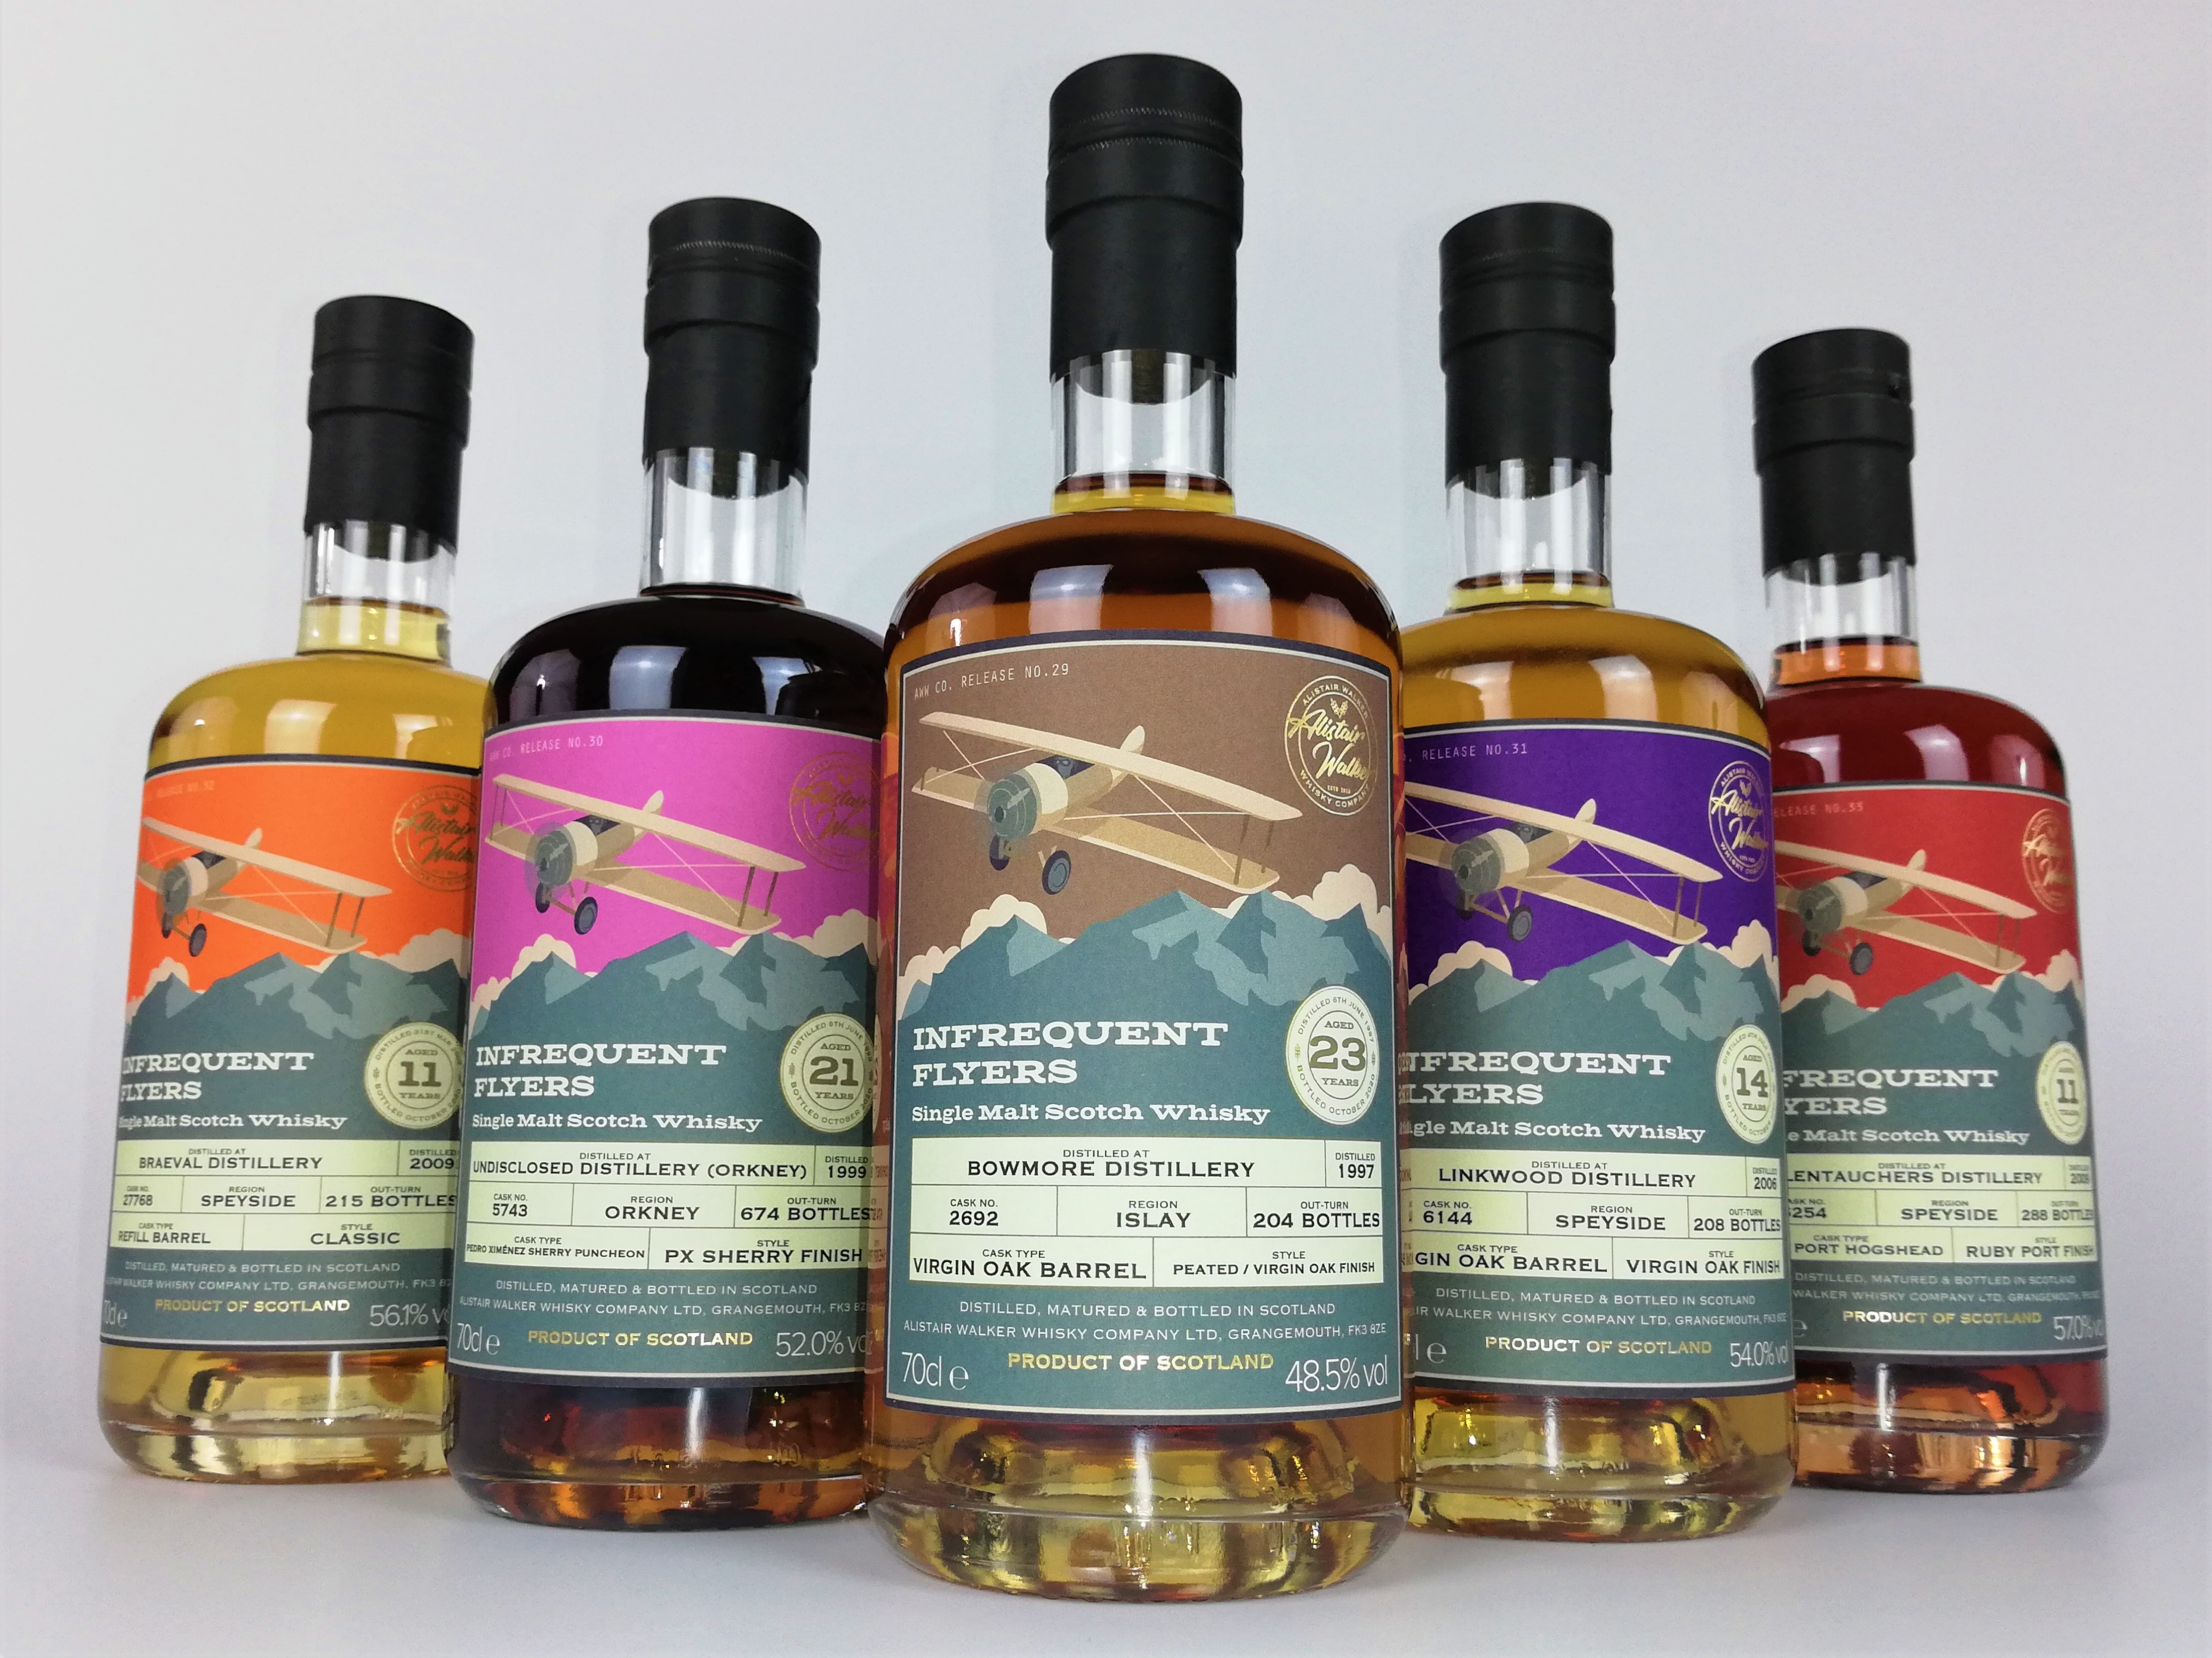 A select of Infrequent Flyers whiskies